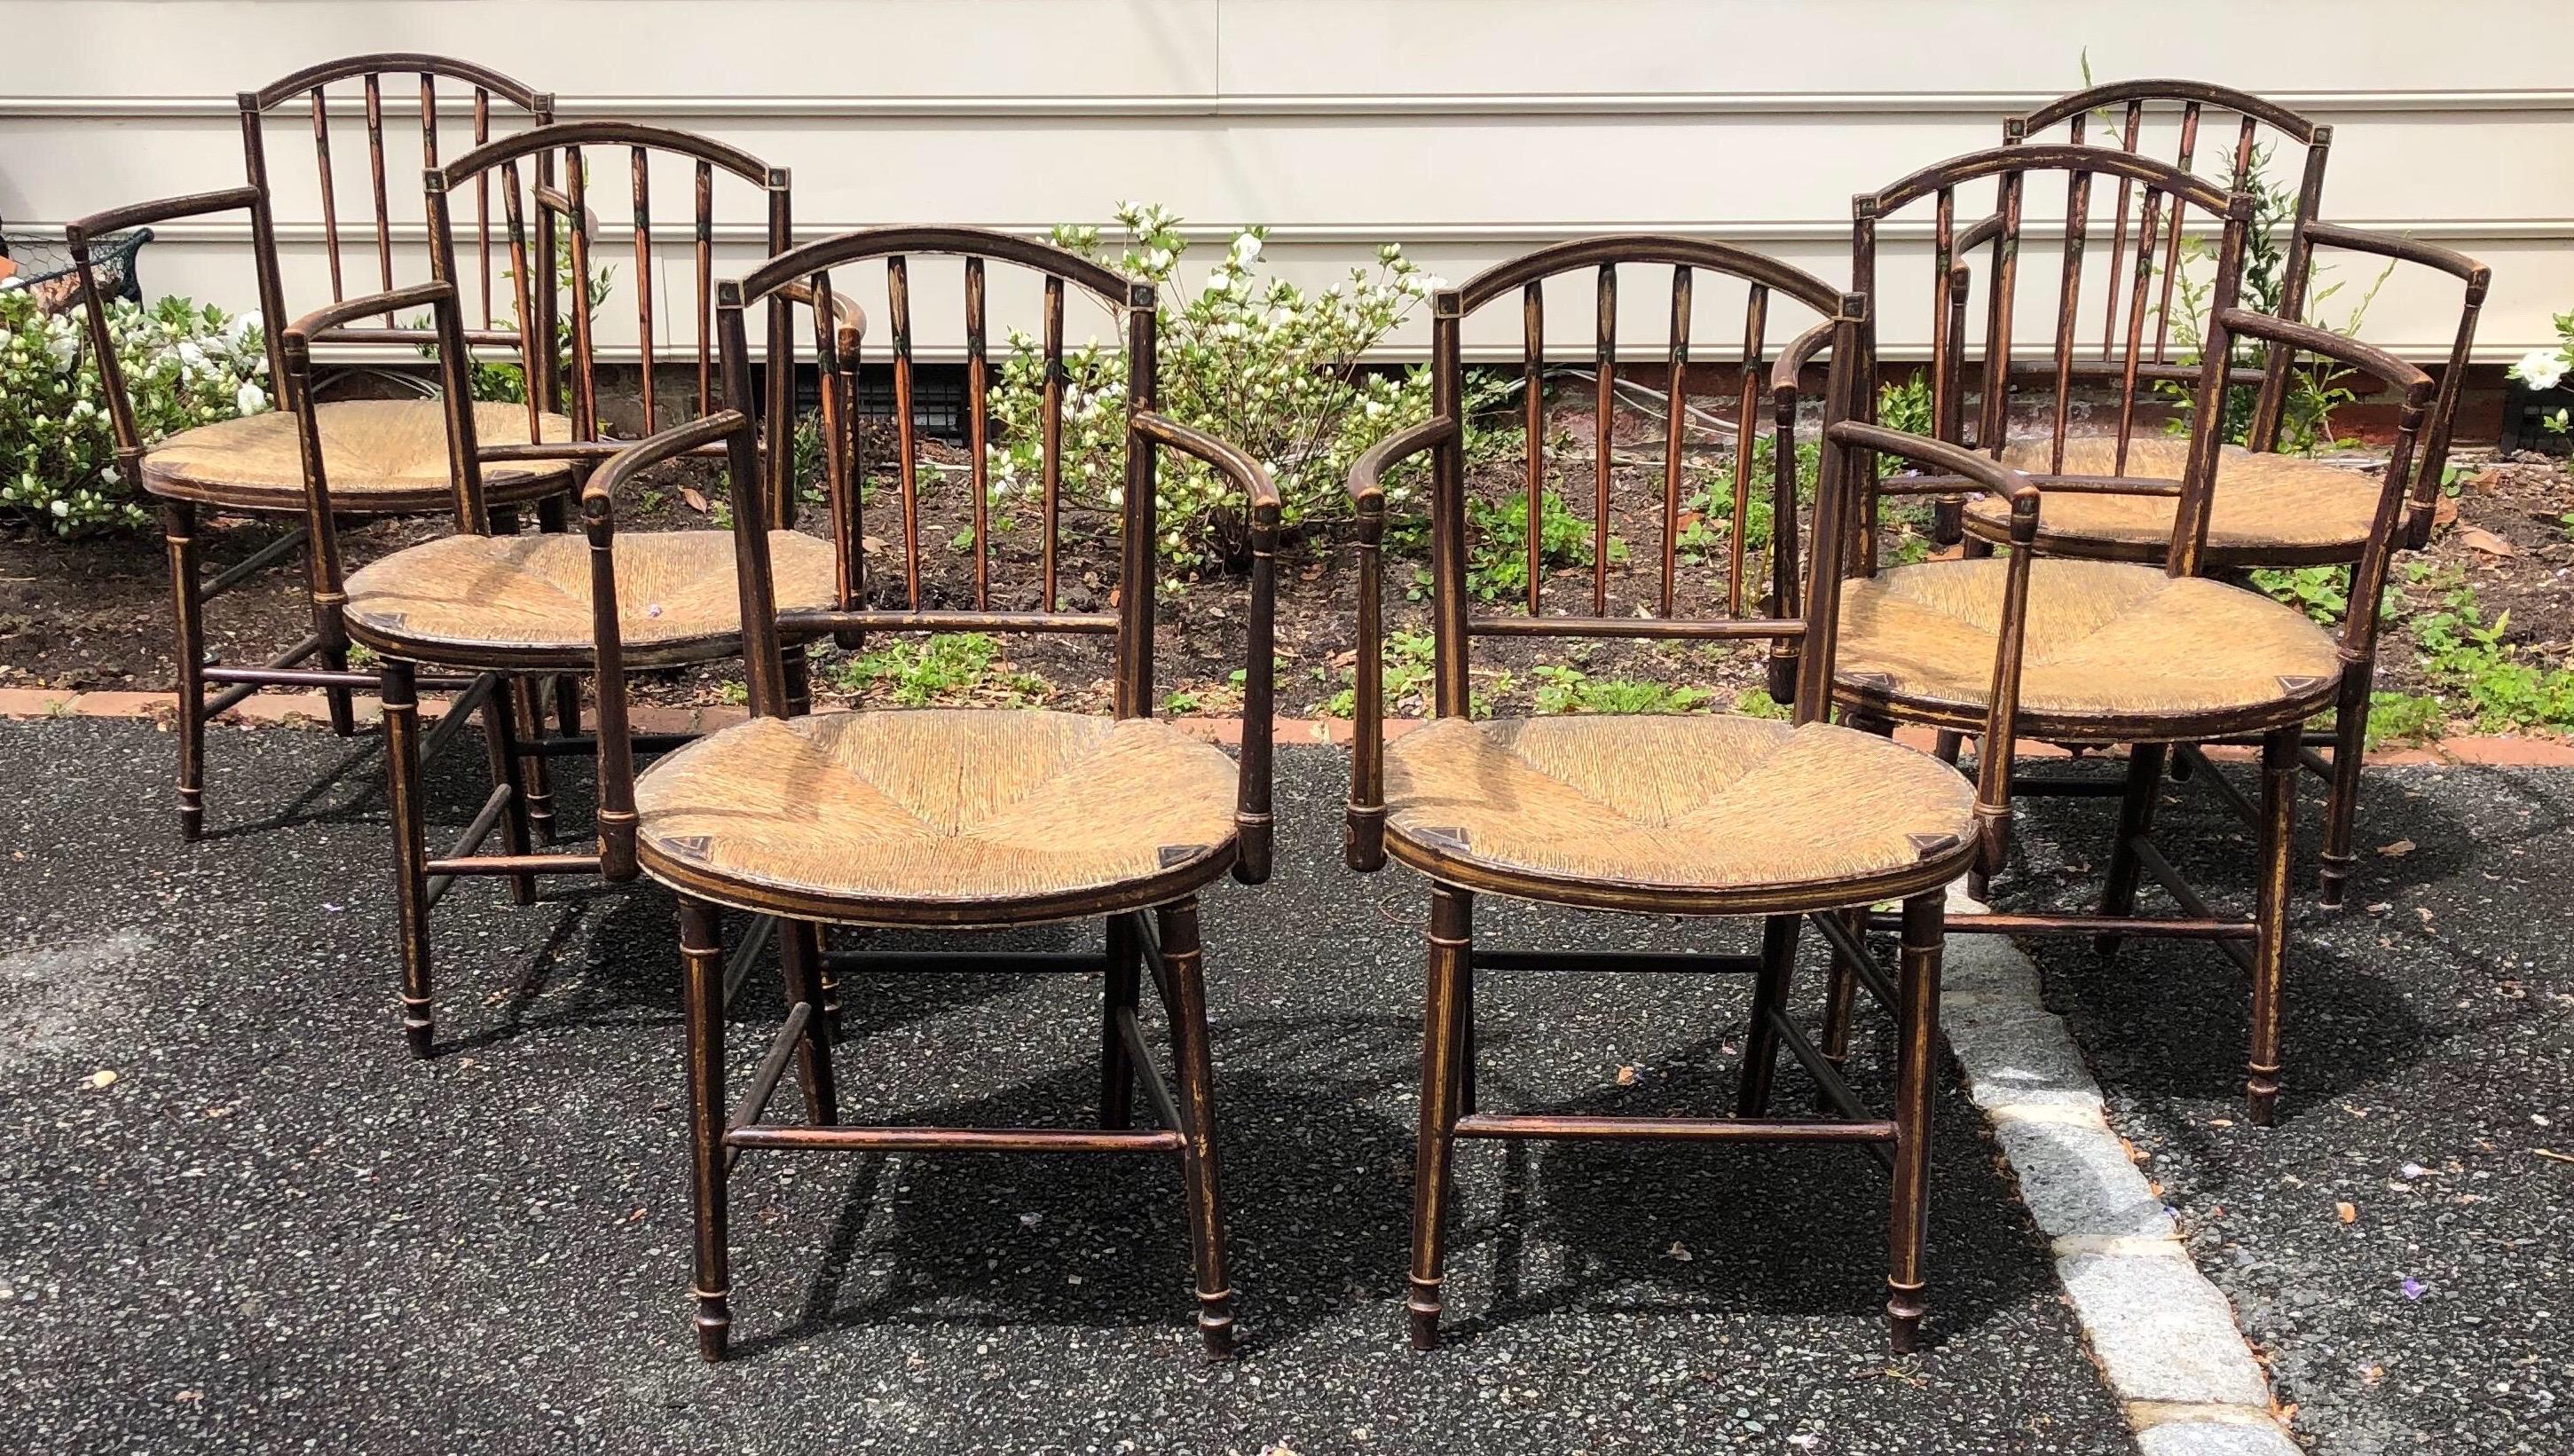 Beautiful set of 6 19th century English Regency armchairs in original paint. Nice, wide and comfortable chairs. Rush seats are in excellent shape- can be used as is or plenty of room to add a cushion.